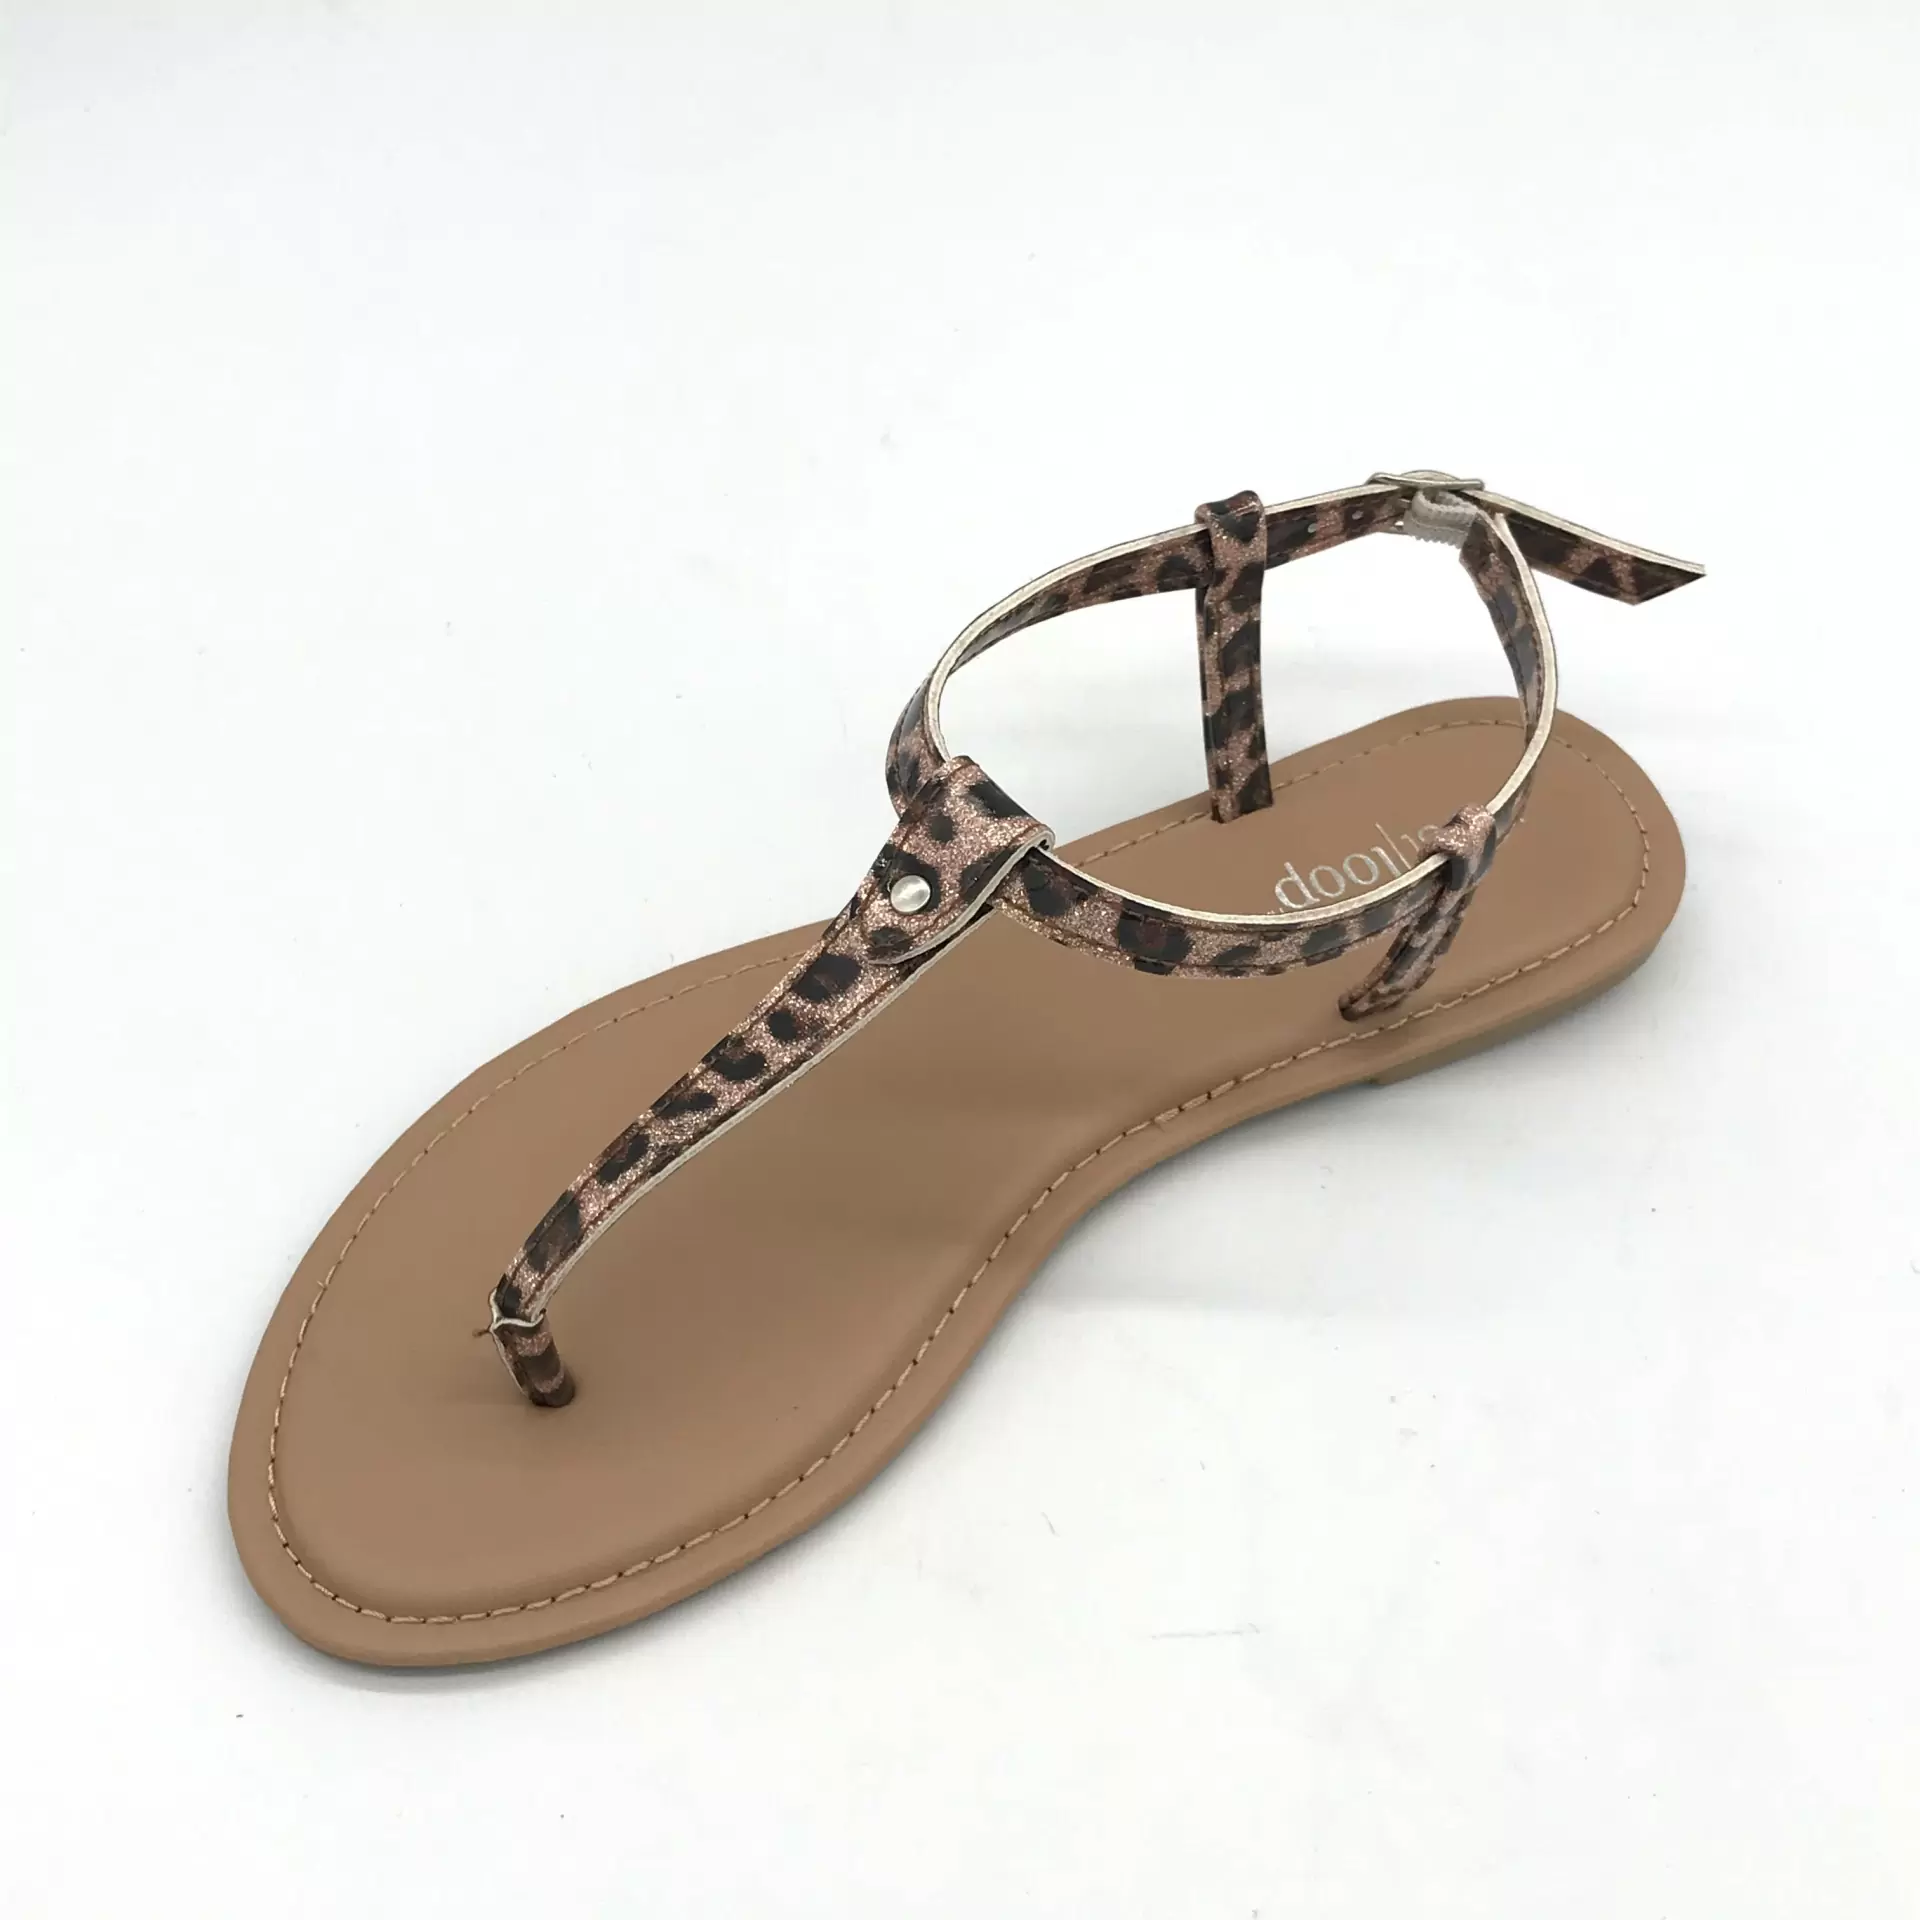 %name What impact has the rise of e commerce had on the sandal wholesale industry?